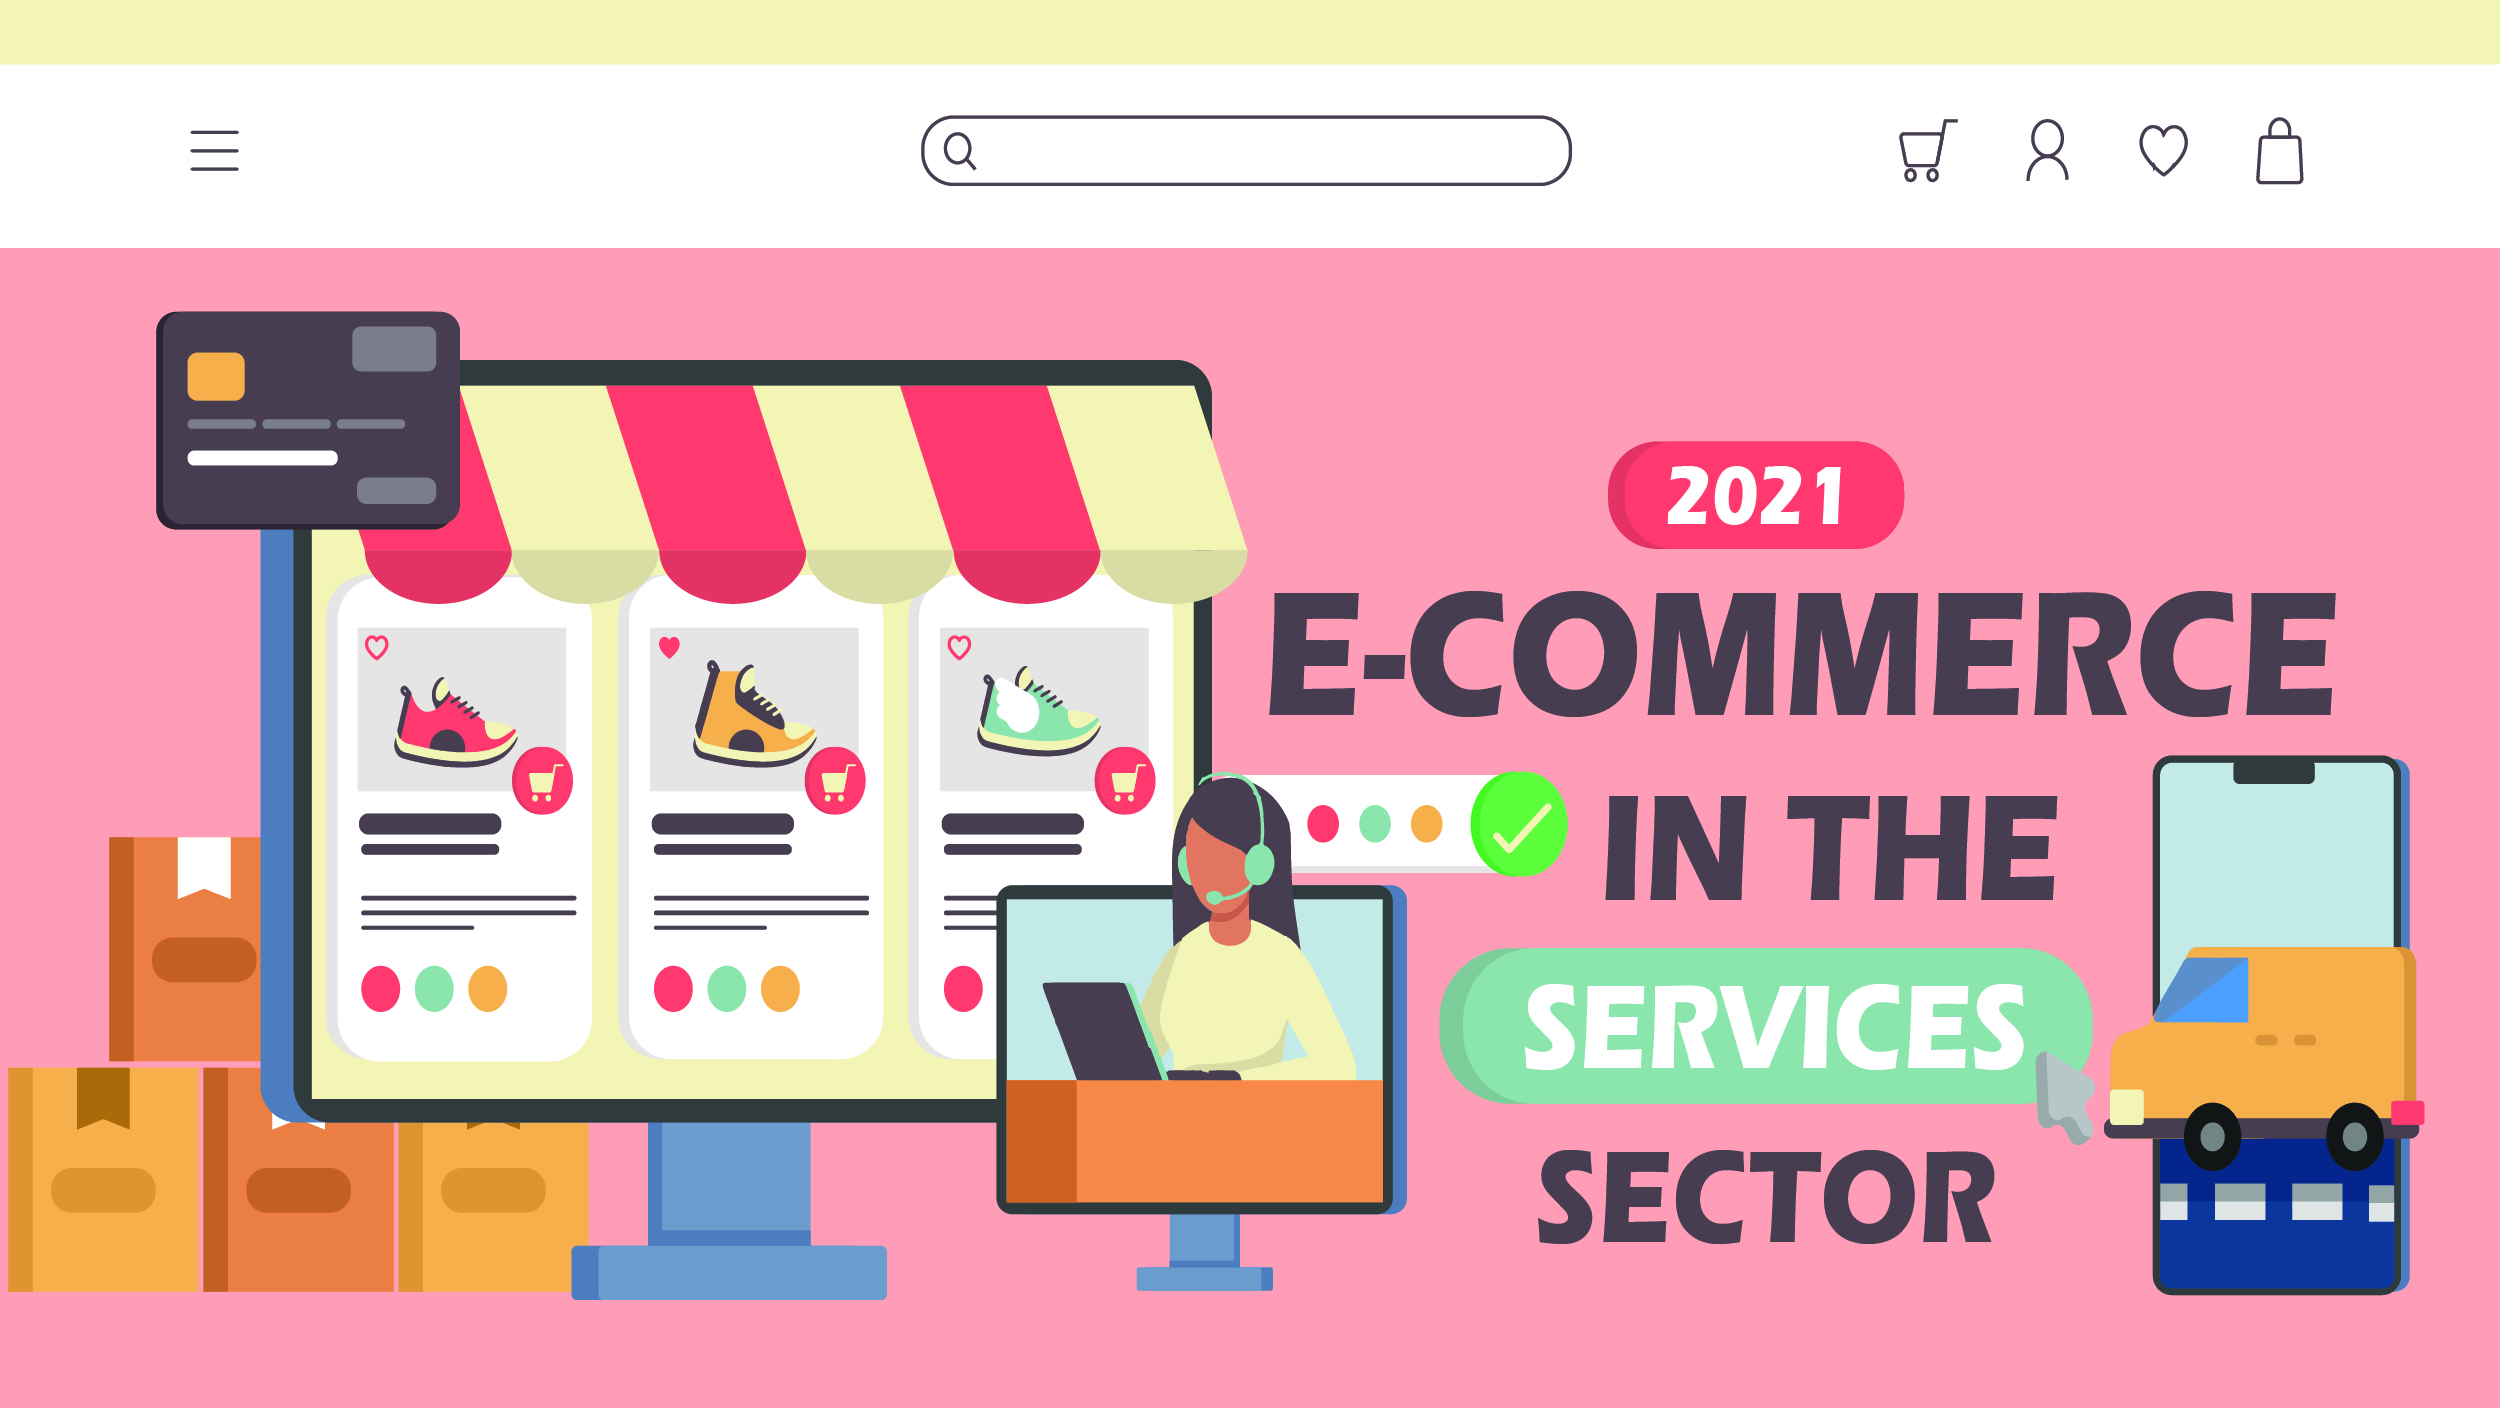 E-Commerce in the Services Sector